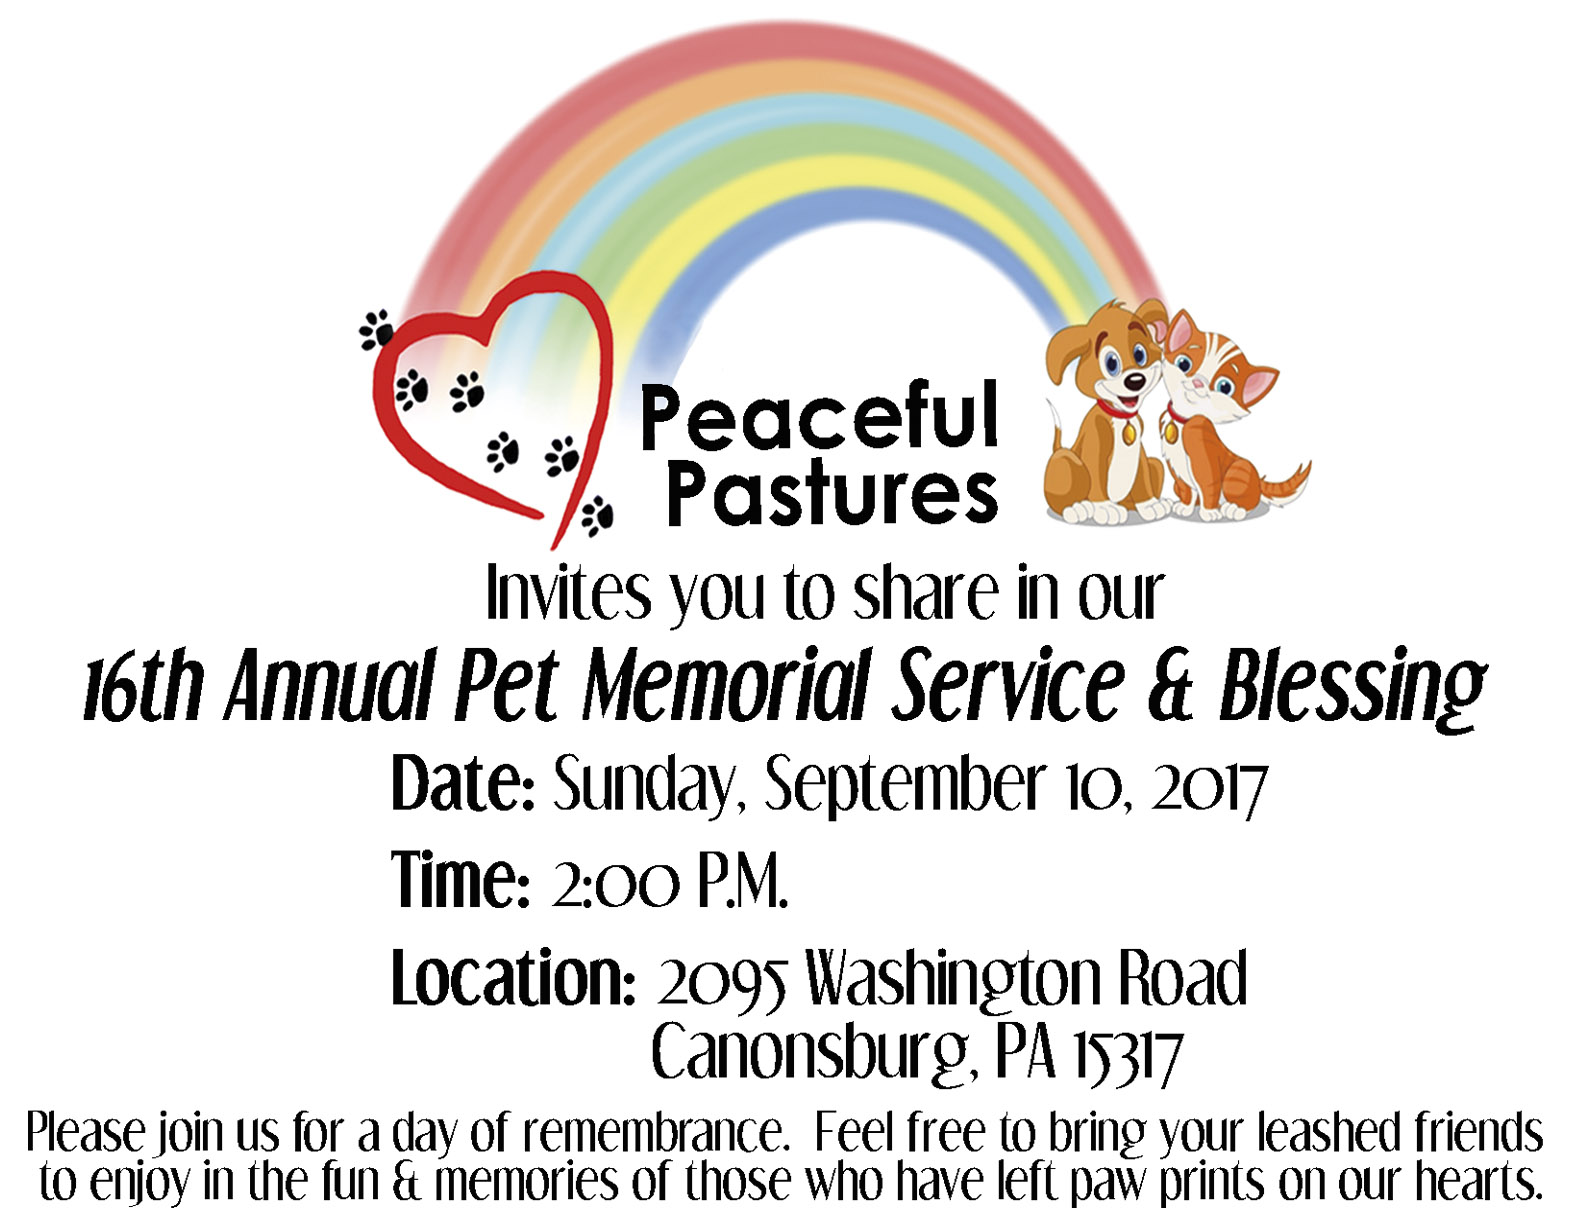 Peaceful Pastures 16th Annual Pet Memorial Service & Blessing